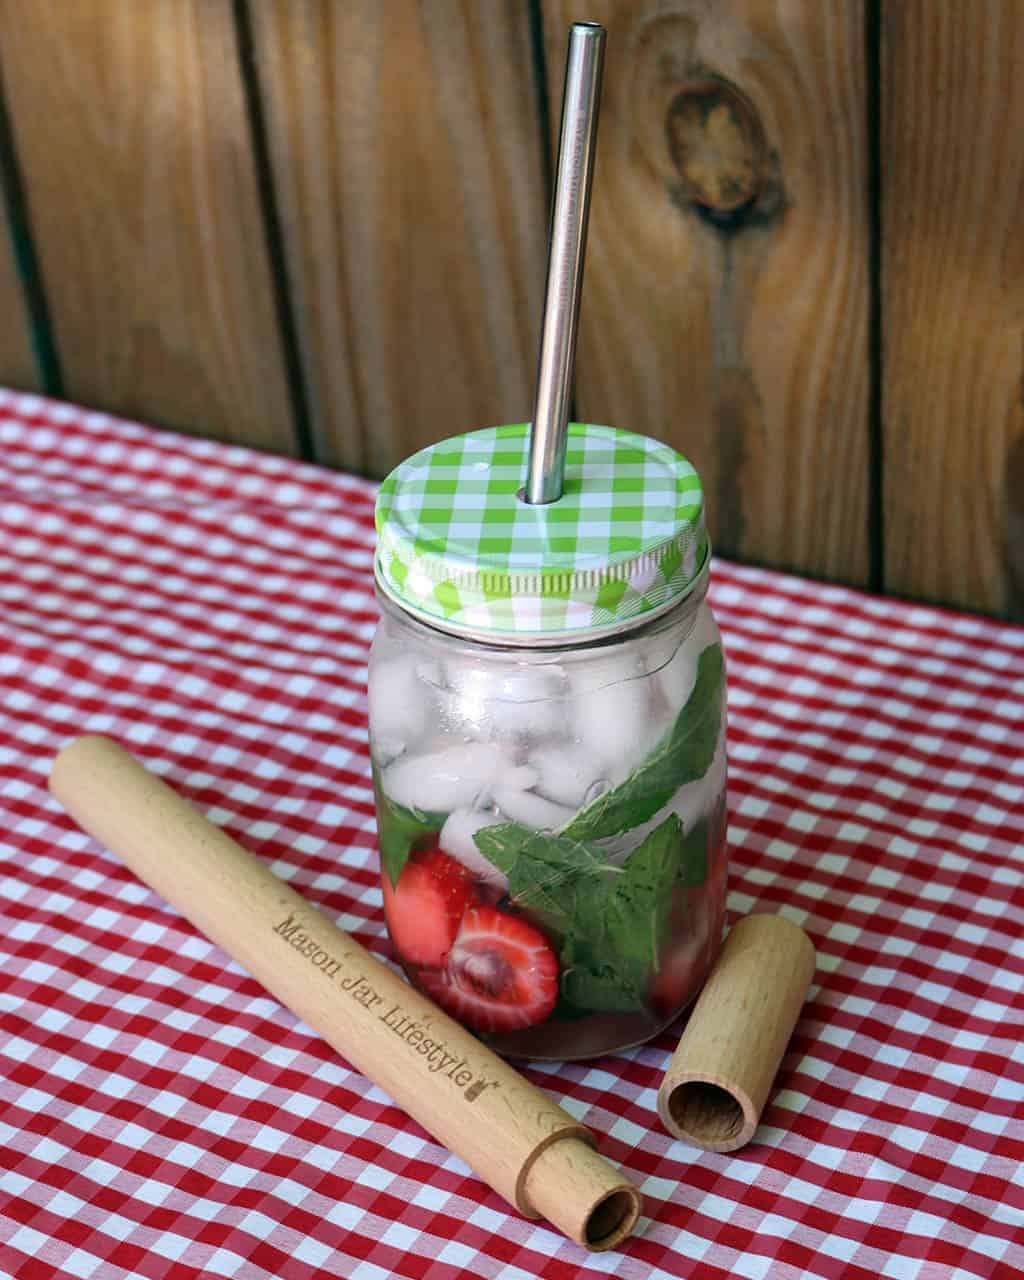 Build-A-Straw Reusable Silicone Straws with Travel Case Mint